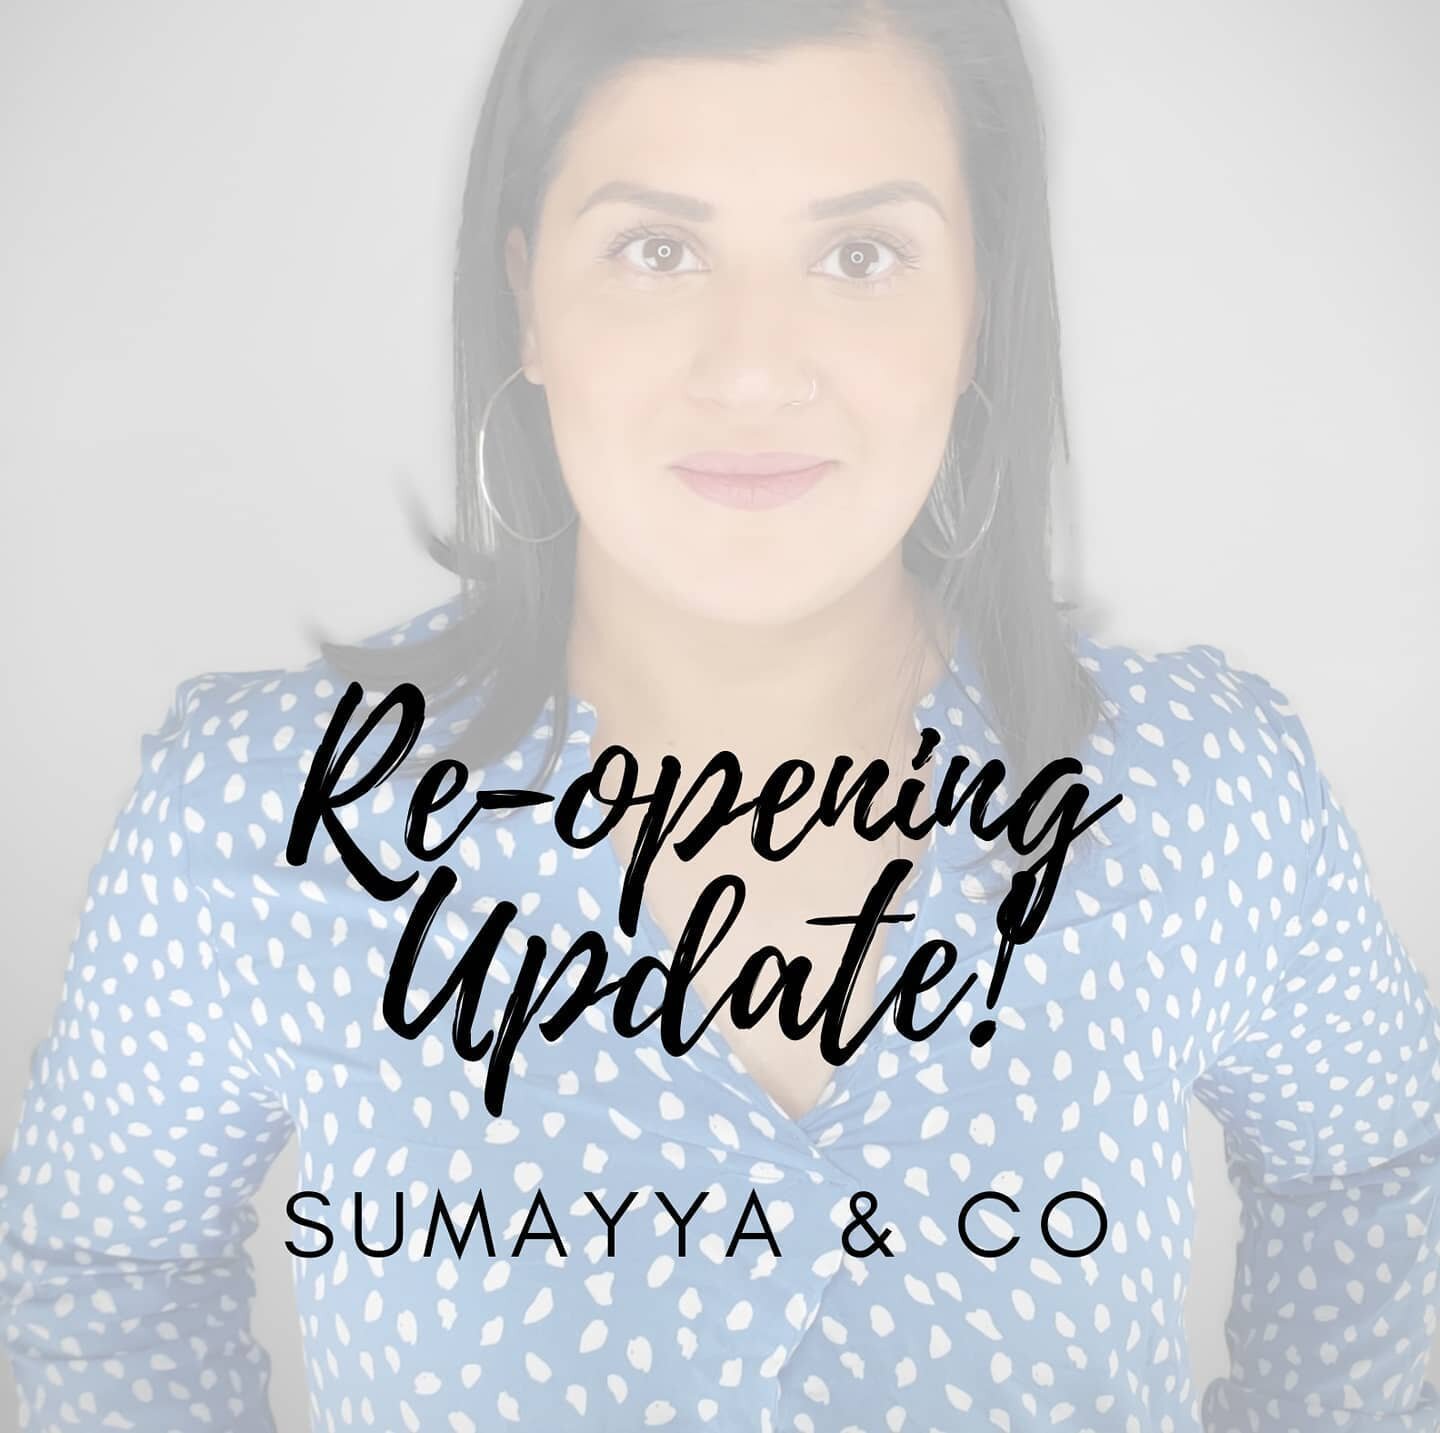 It&rsquo;s happening! ⁣⁣
⁣⁣
Sumayya &amp; Co is reopening on July 15th! In one month, I will be welcoming you all to a brand new space! This has been in the works for a long time and I&rsquo;m so excited to share this new chapter with my clients-turn